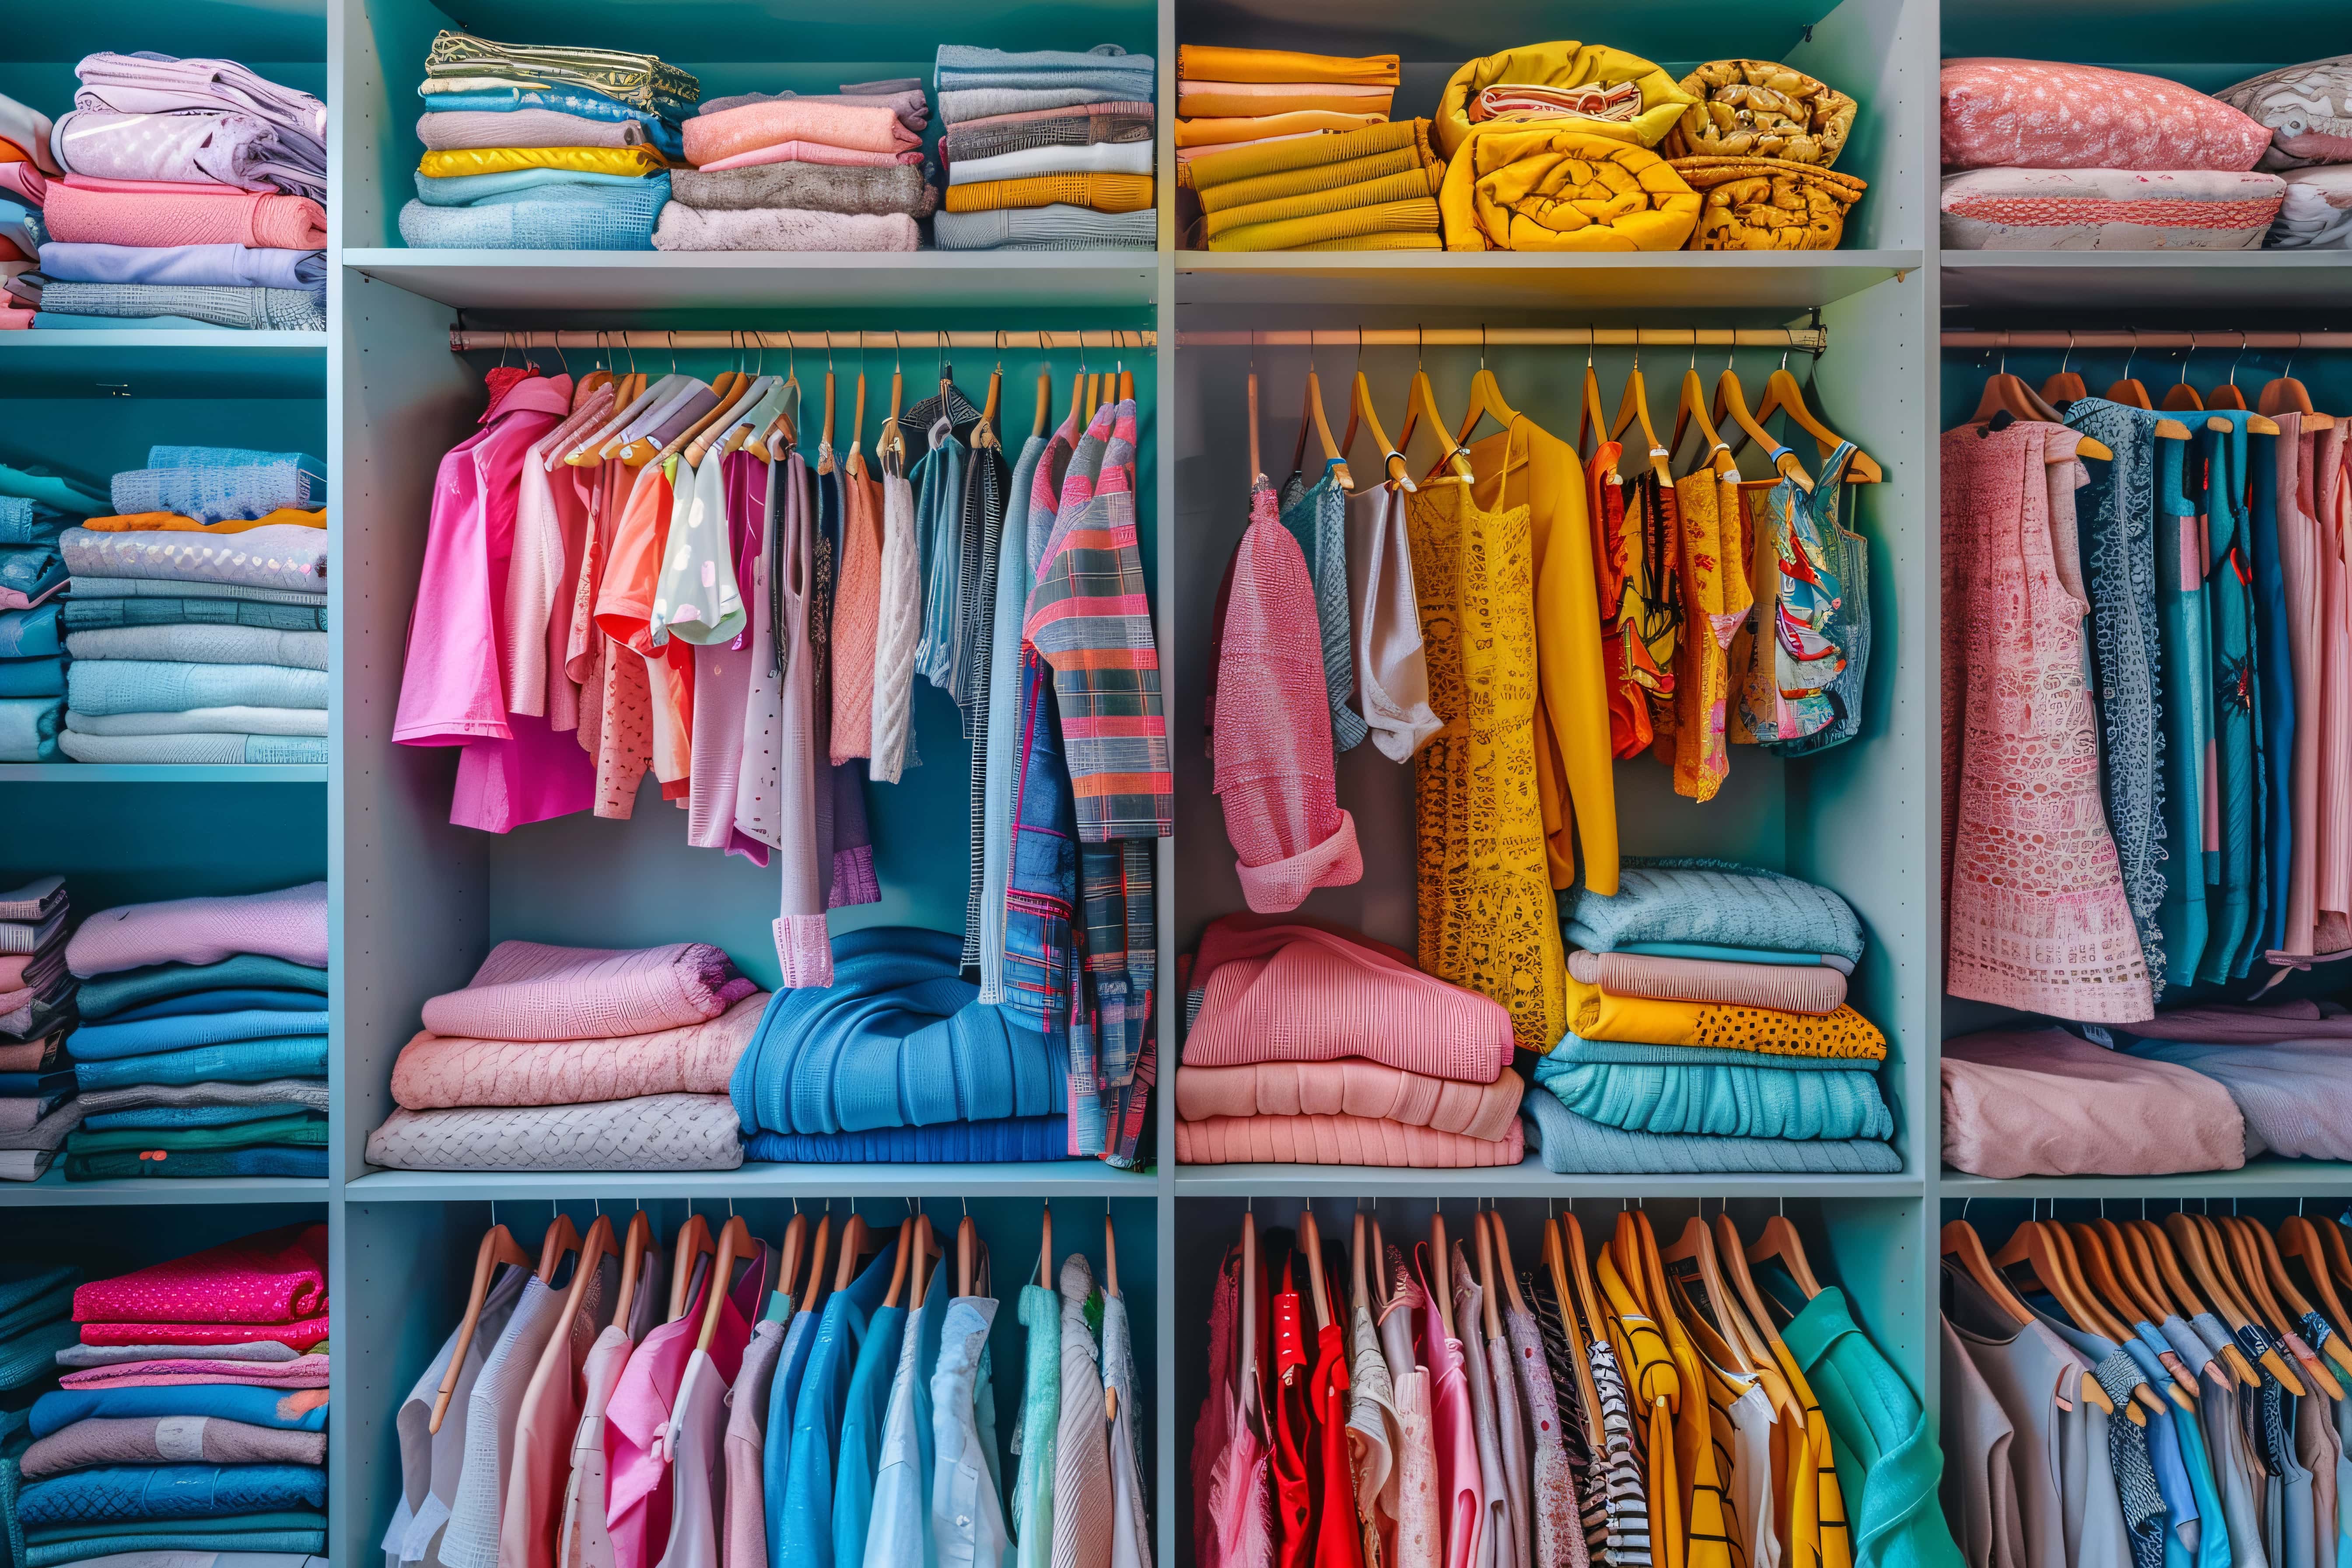 An immaculately organised wardrobe space with colour coordinated spaces for hanging and folding clothing and bedding items.